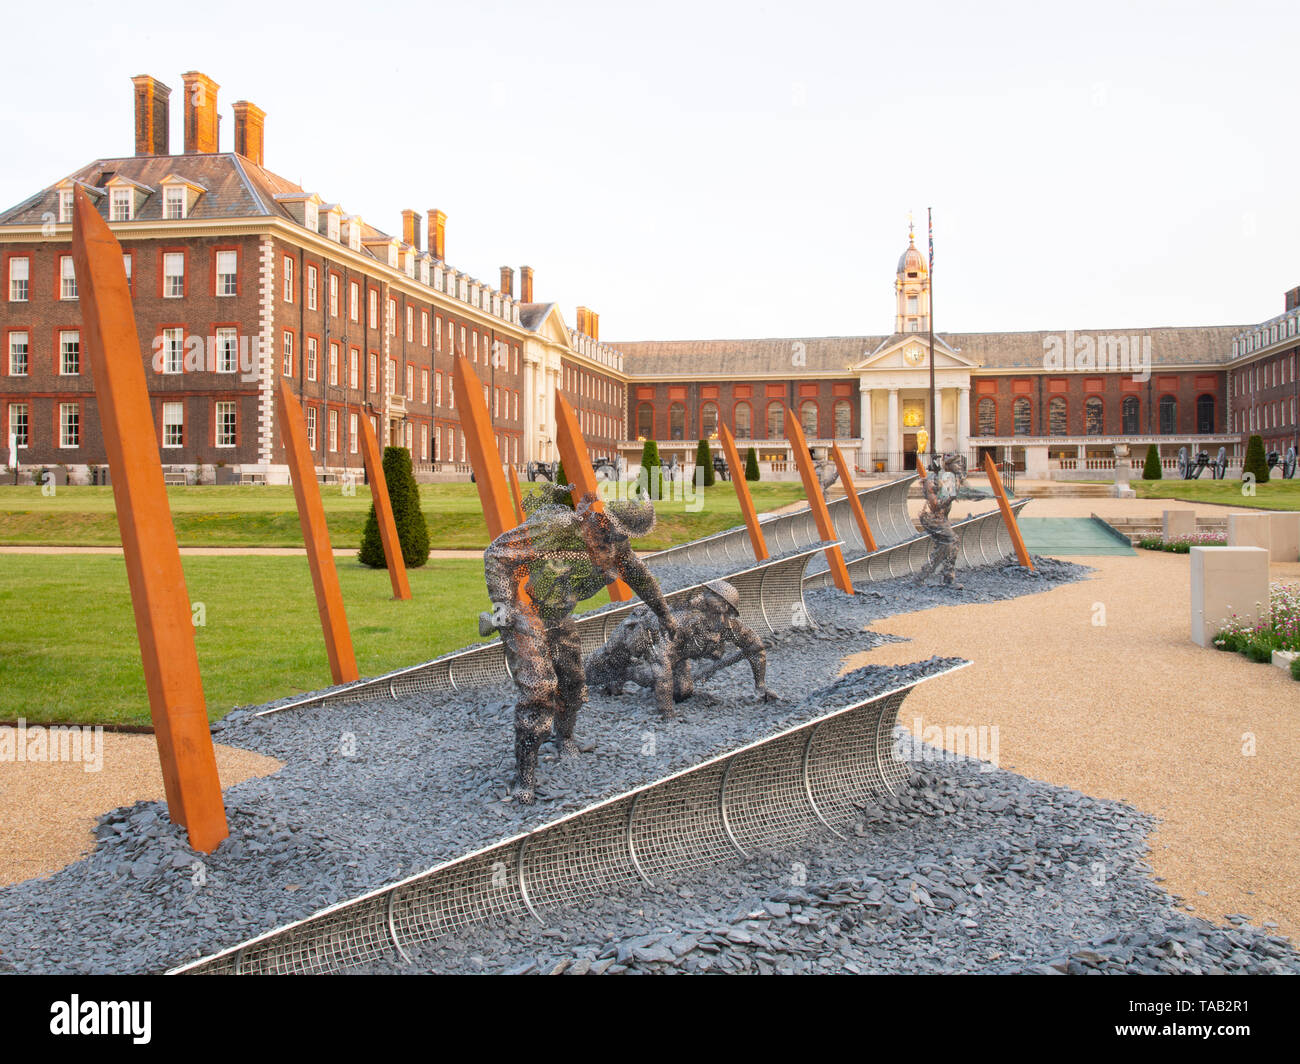 A memorial sculpture comemorating the 75th anniversary of D Day on the grounds of the Royal Hospital,  London, UK Stock Photo